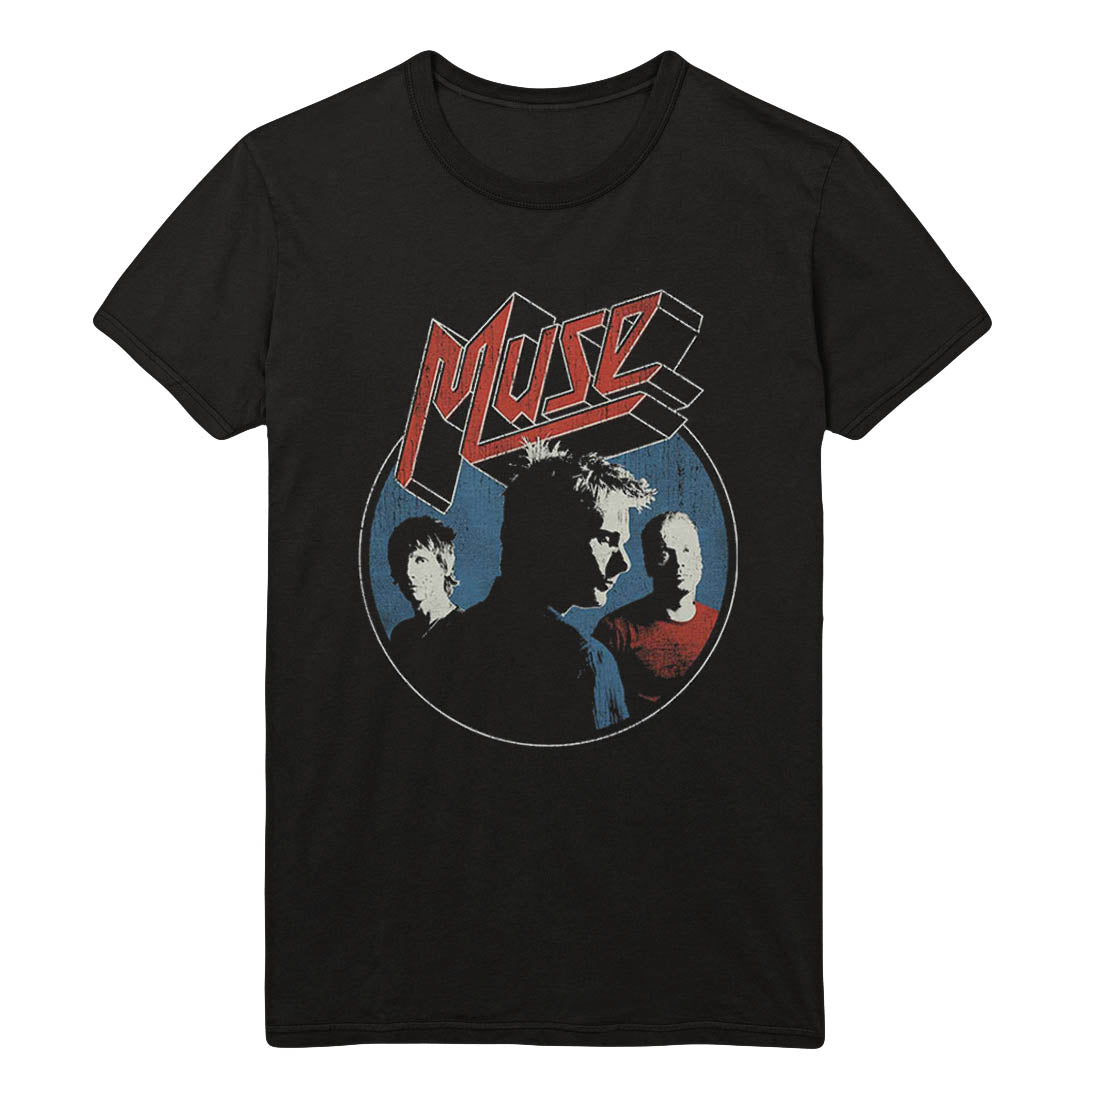 Muse Get Down T-Shirt